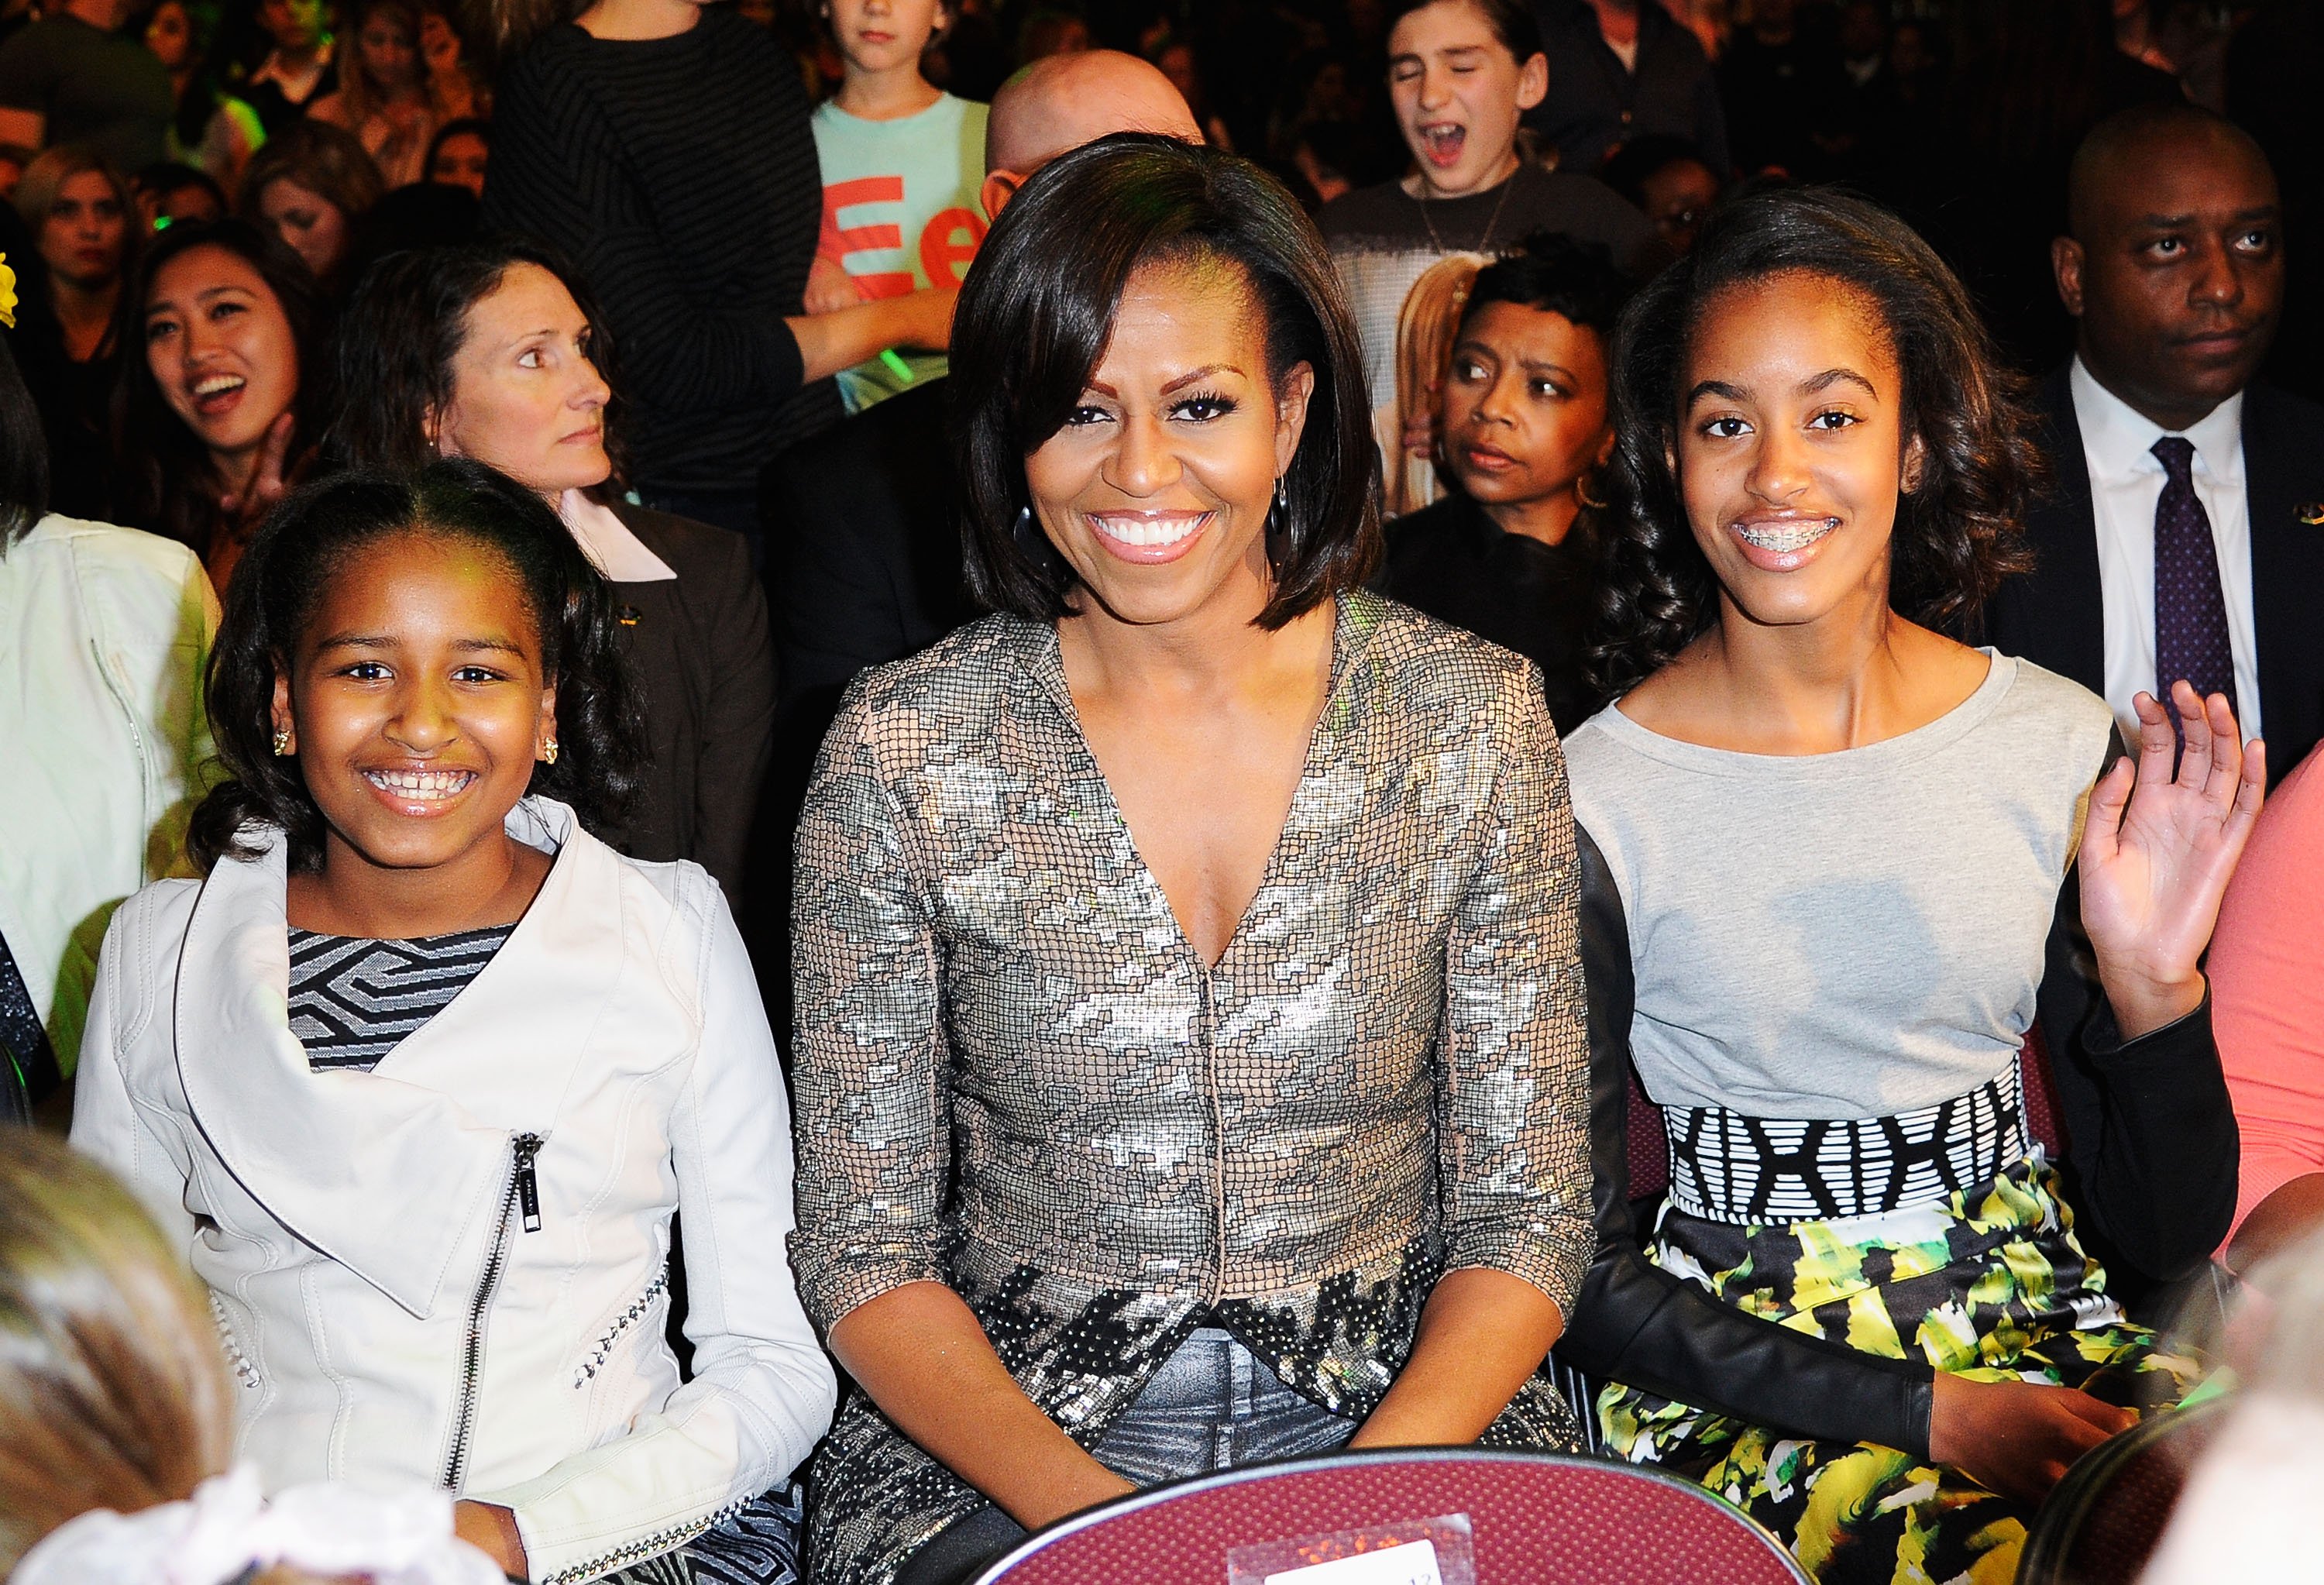  Michelle Obama with daughters Malia and Sasha at Galen Center on March 31 2012 in Los Angeles California | Source: Getty Images